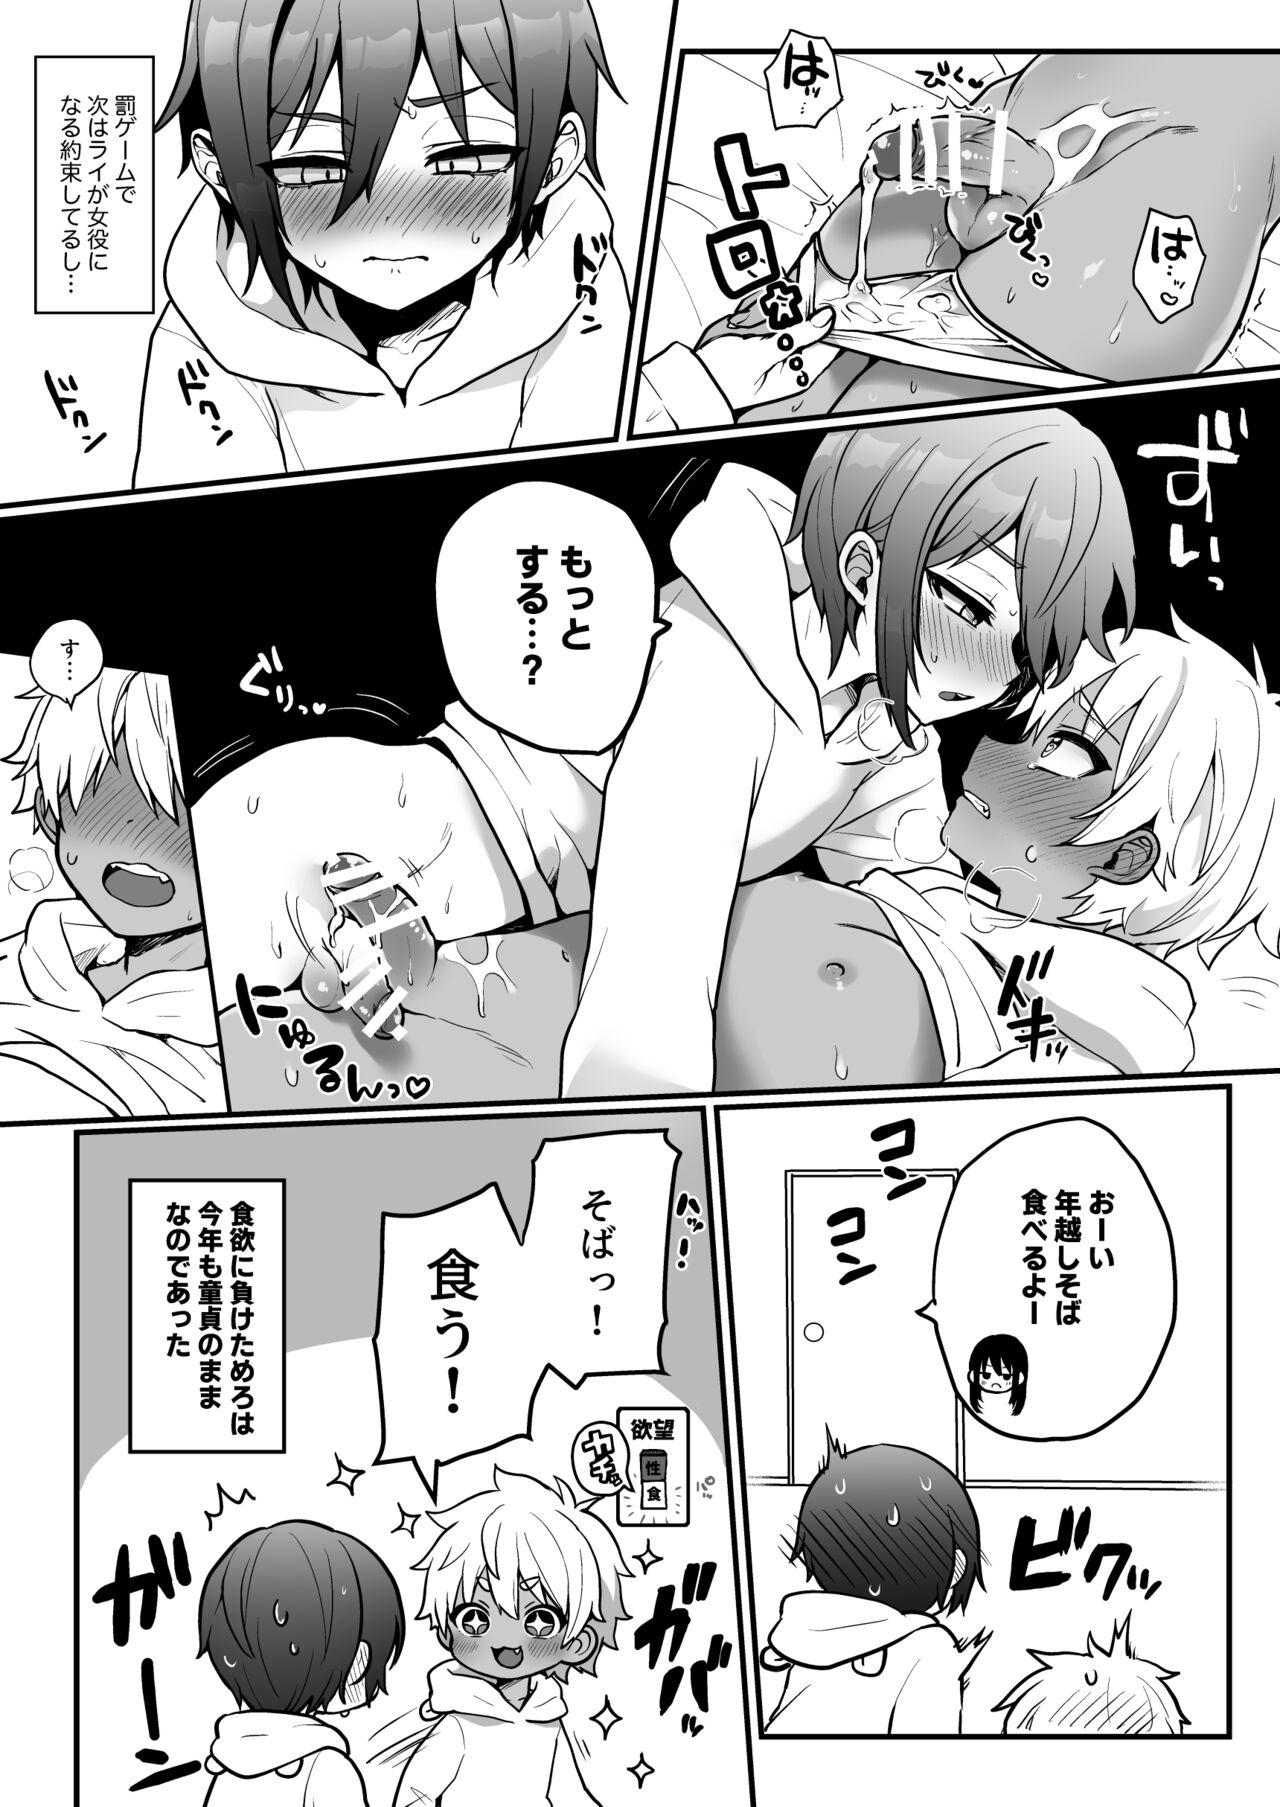 Red Head 今年もありがとうございました! - Original Mature Woman - Page 6